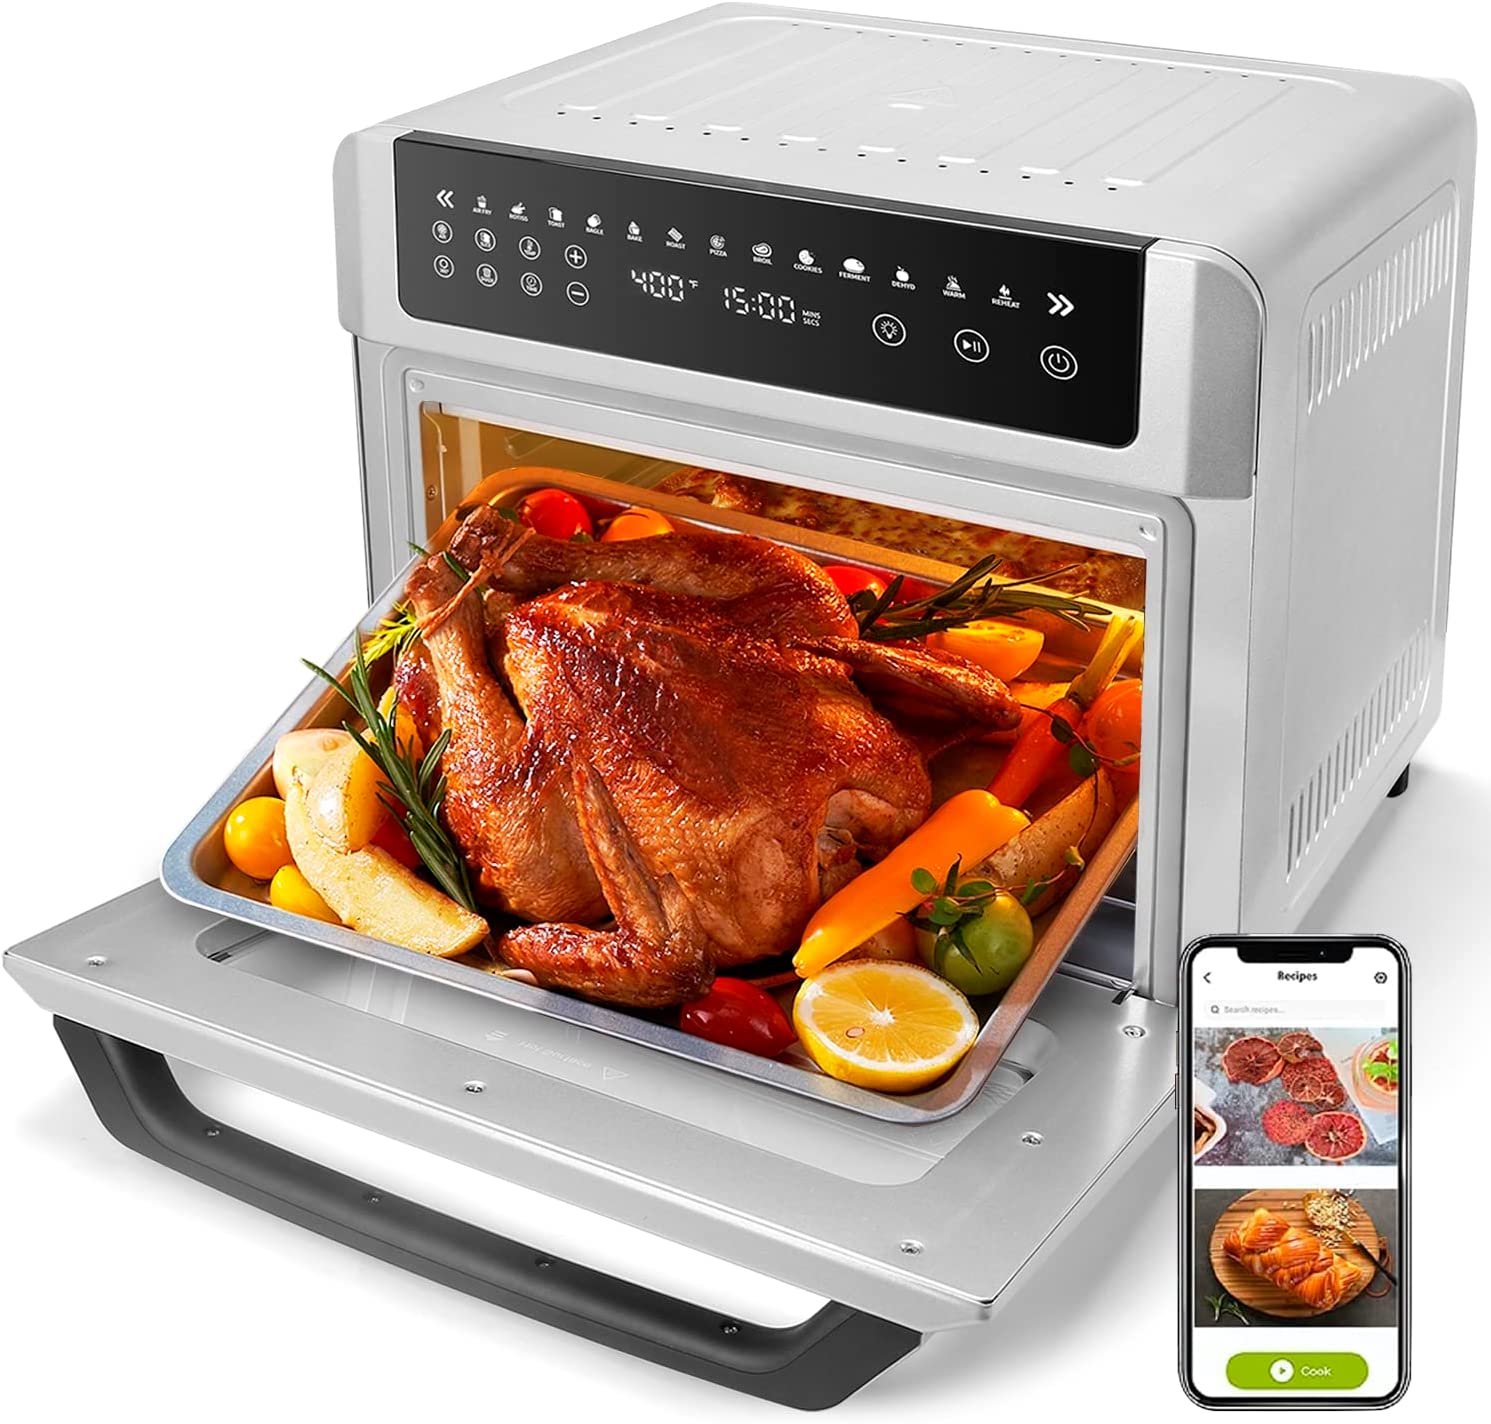 Gevi Air Fryer Toaster Oven Combo, Silver